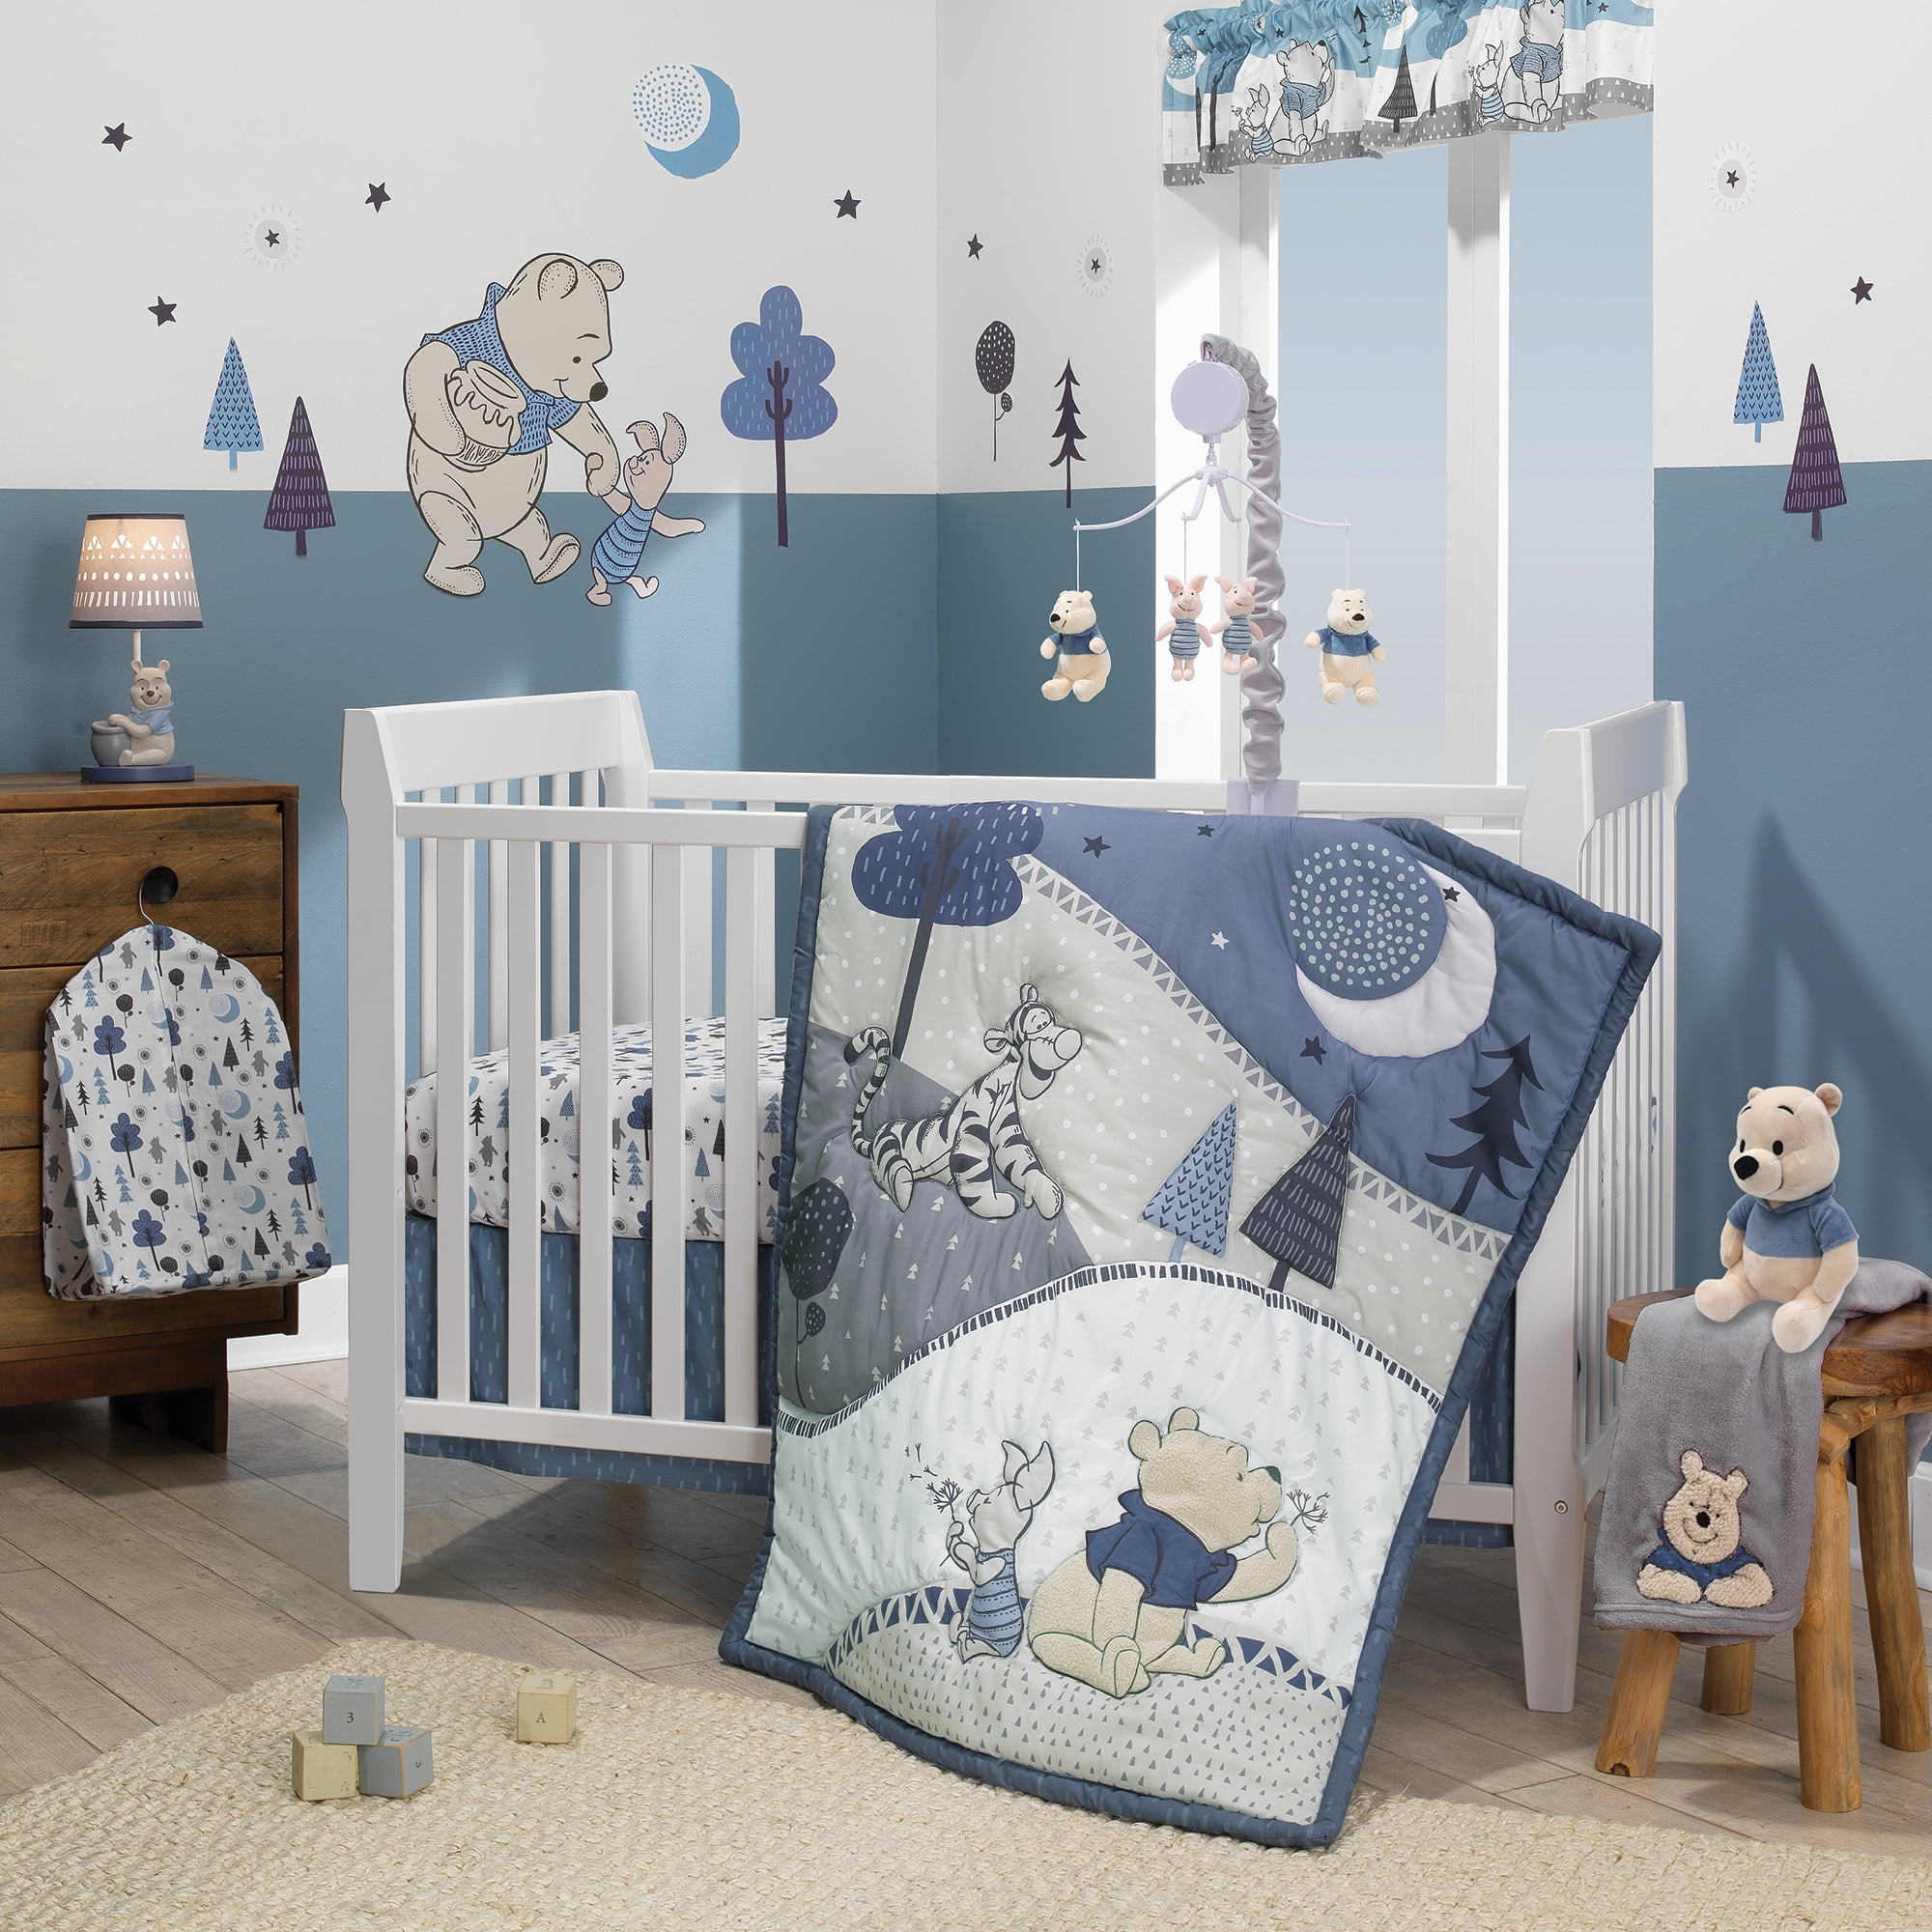 Disney Baby Forever Pooh 3Piece Baby Crib Bedding Set by Lambs & Ivy Blue